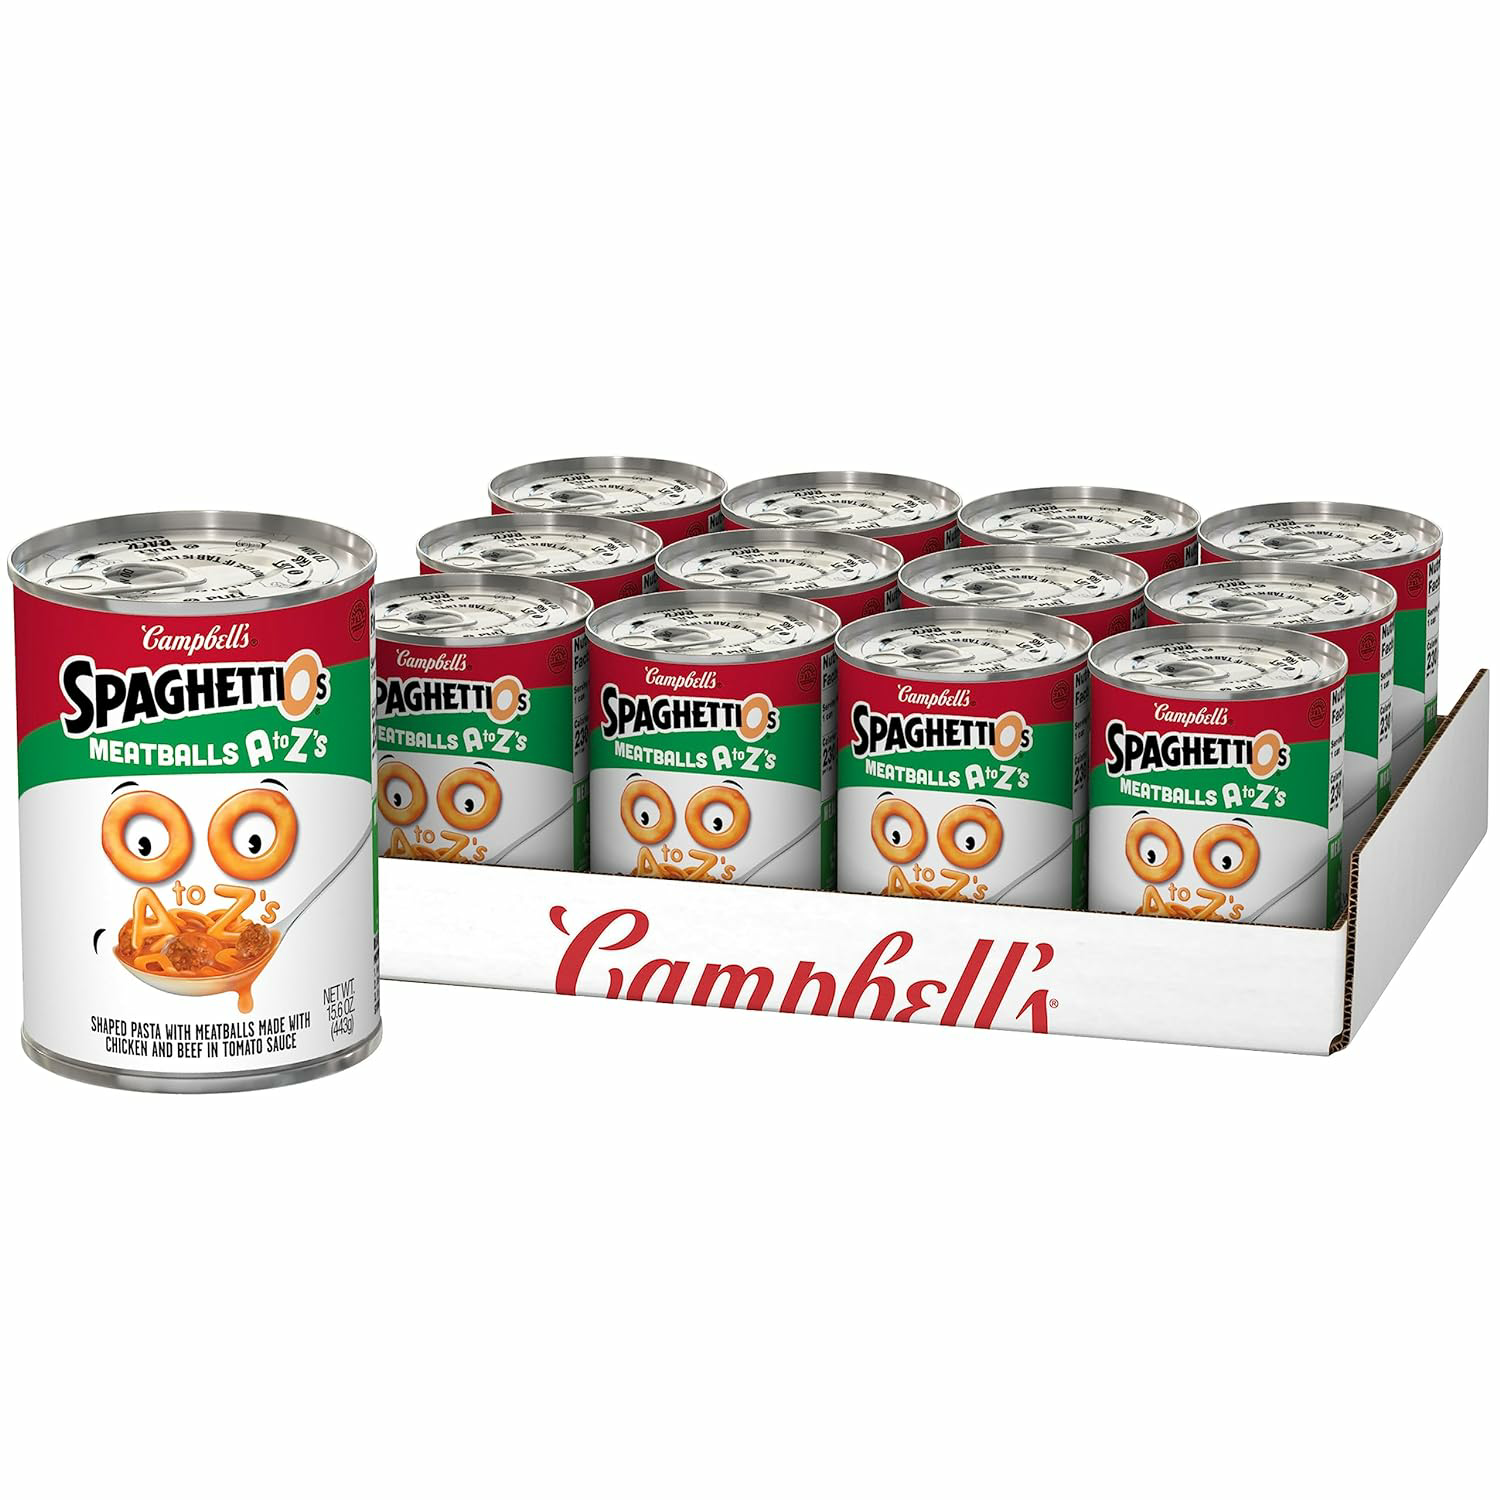 SpaghettiOs A to Z's Canned Pasta with Meatballs, 15.6 oz Can (Pack of 12) $11.19